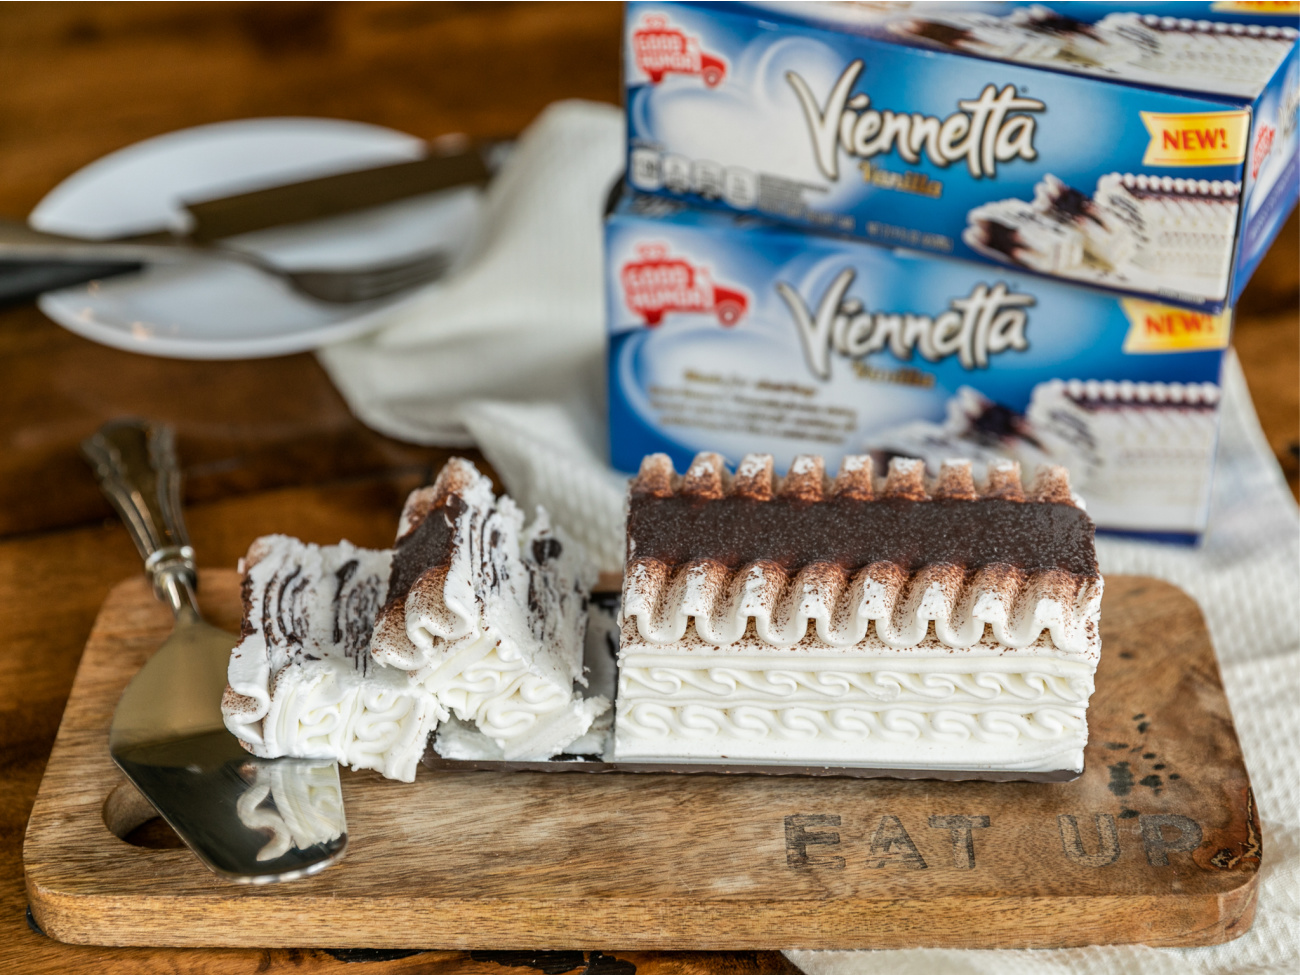 Good Humor Viennetta Cake Is A Delicious Dessert Your Whole Family Will Love - Save At Publix! on I Heart Publix 4